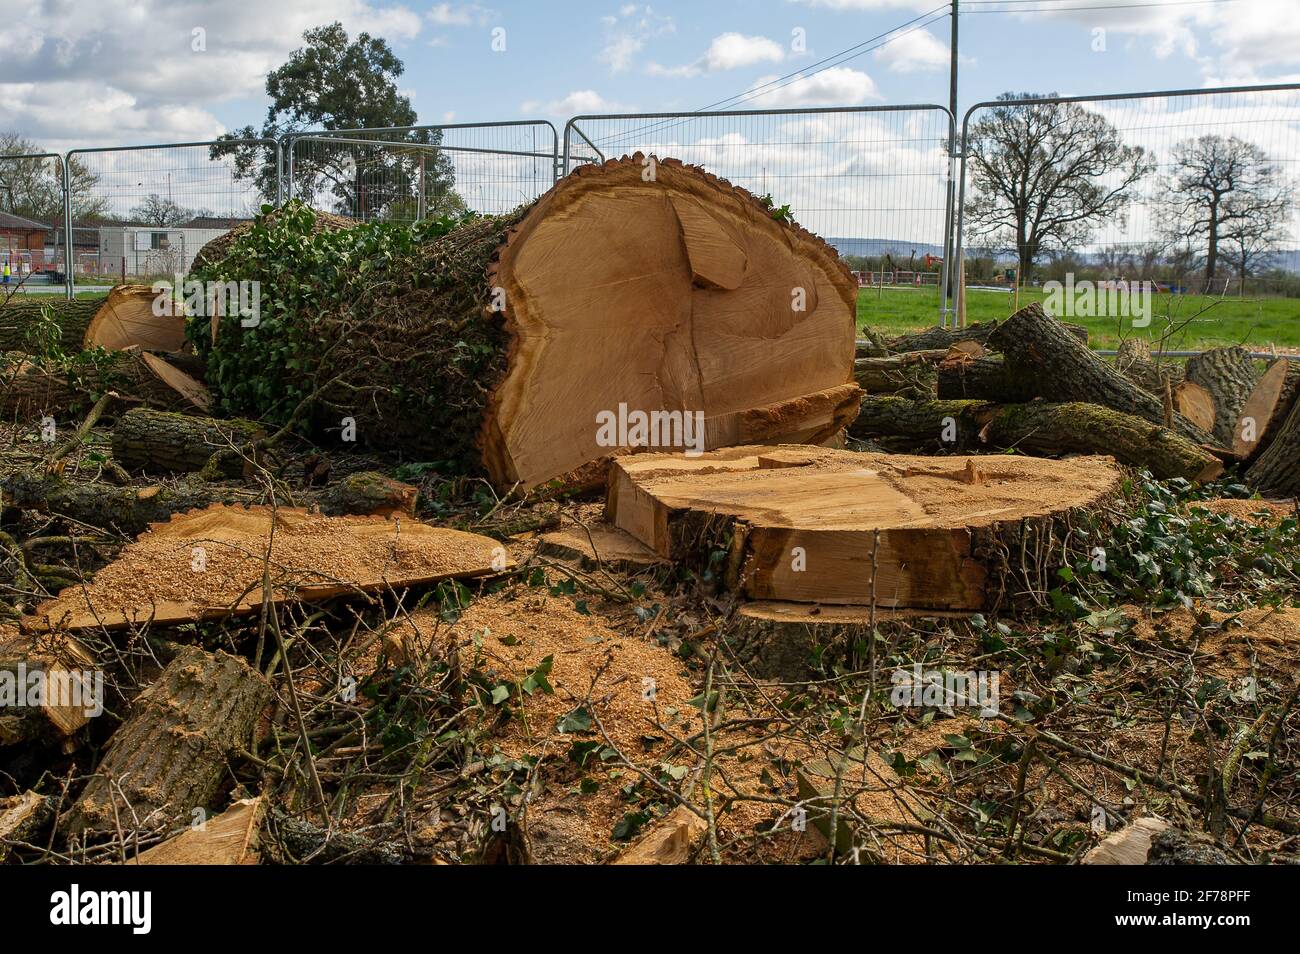 Aylesbury, UK. 5th April, 2021. HS2 Ltd have just felled yet another huge oak tree during the bird nesting season causing much upset to locals and environmentalists. The very controversial and over budget High Speed 2 rail link from London to Birmingham is carving a huge scar across the Chilterns which is an AONB and puts 108 ancient woodlands, 693 wildlife sites and 33 SSSIs at risk. Credit: Maureen McLean/Alamy Stock Photo